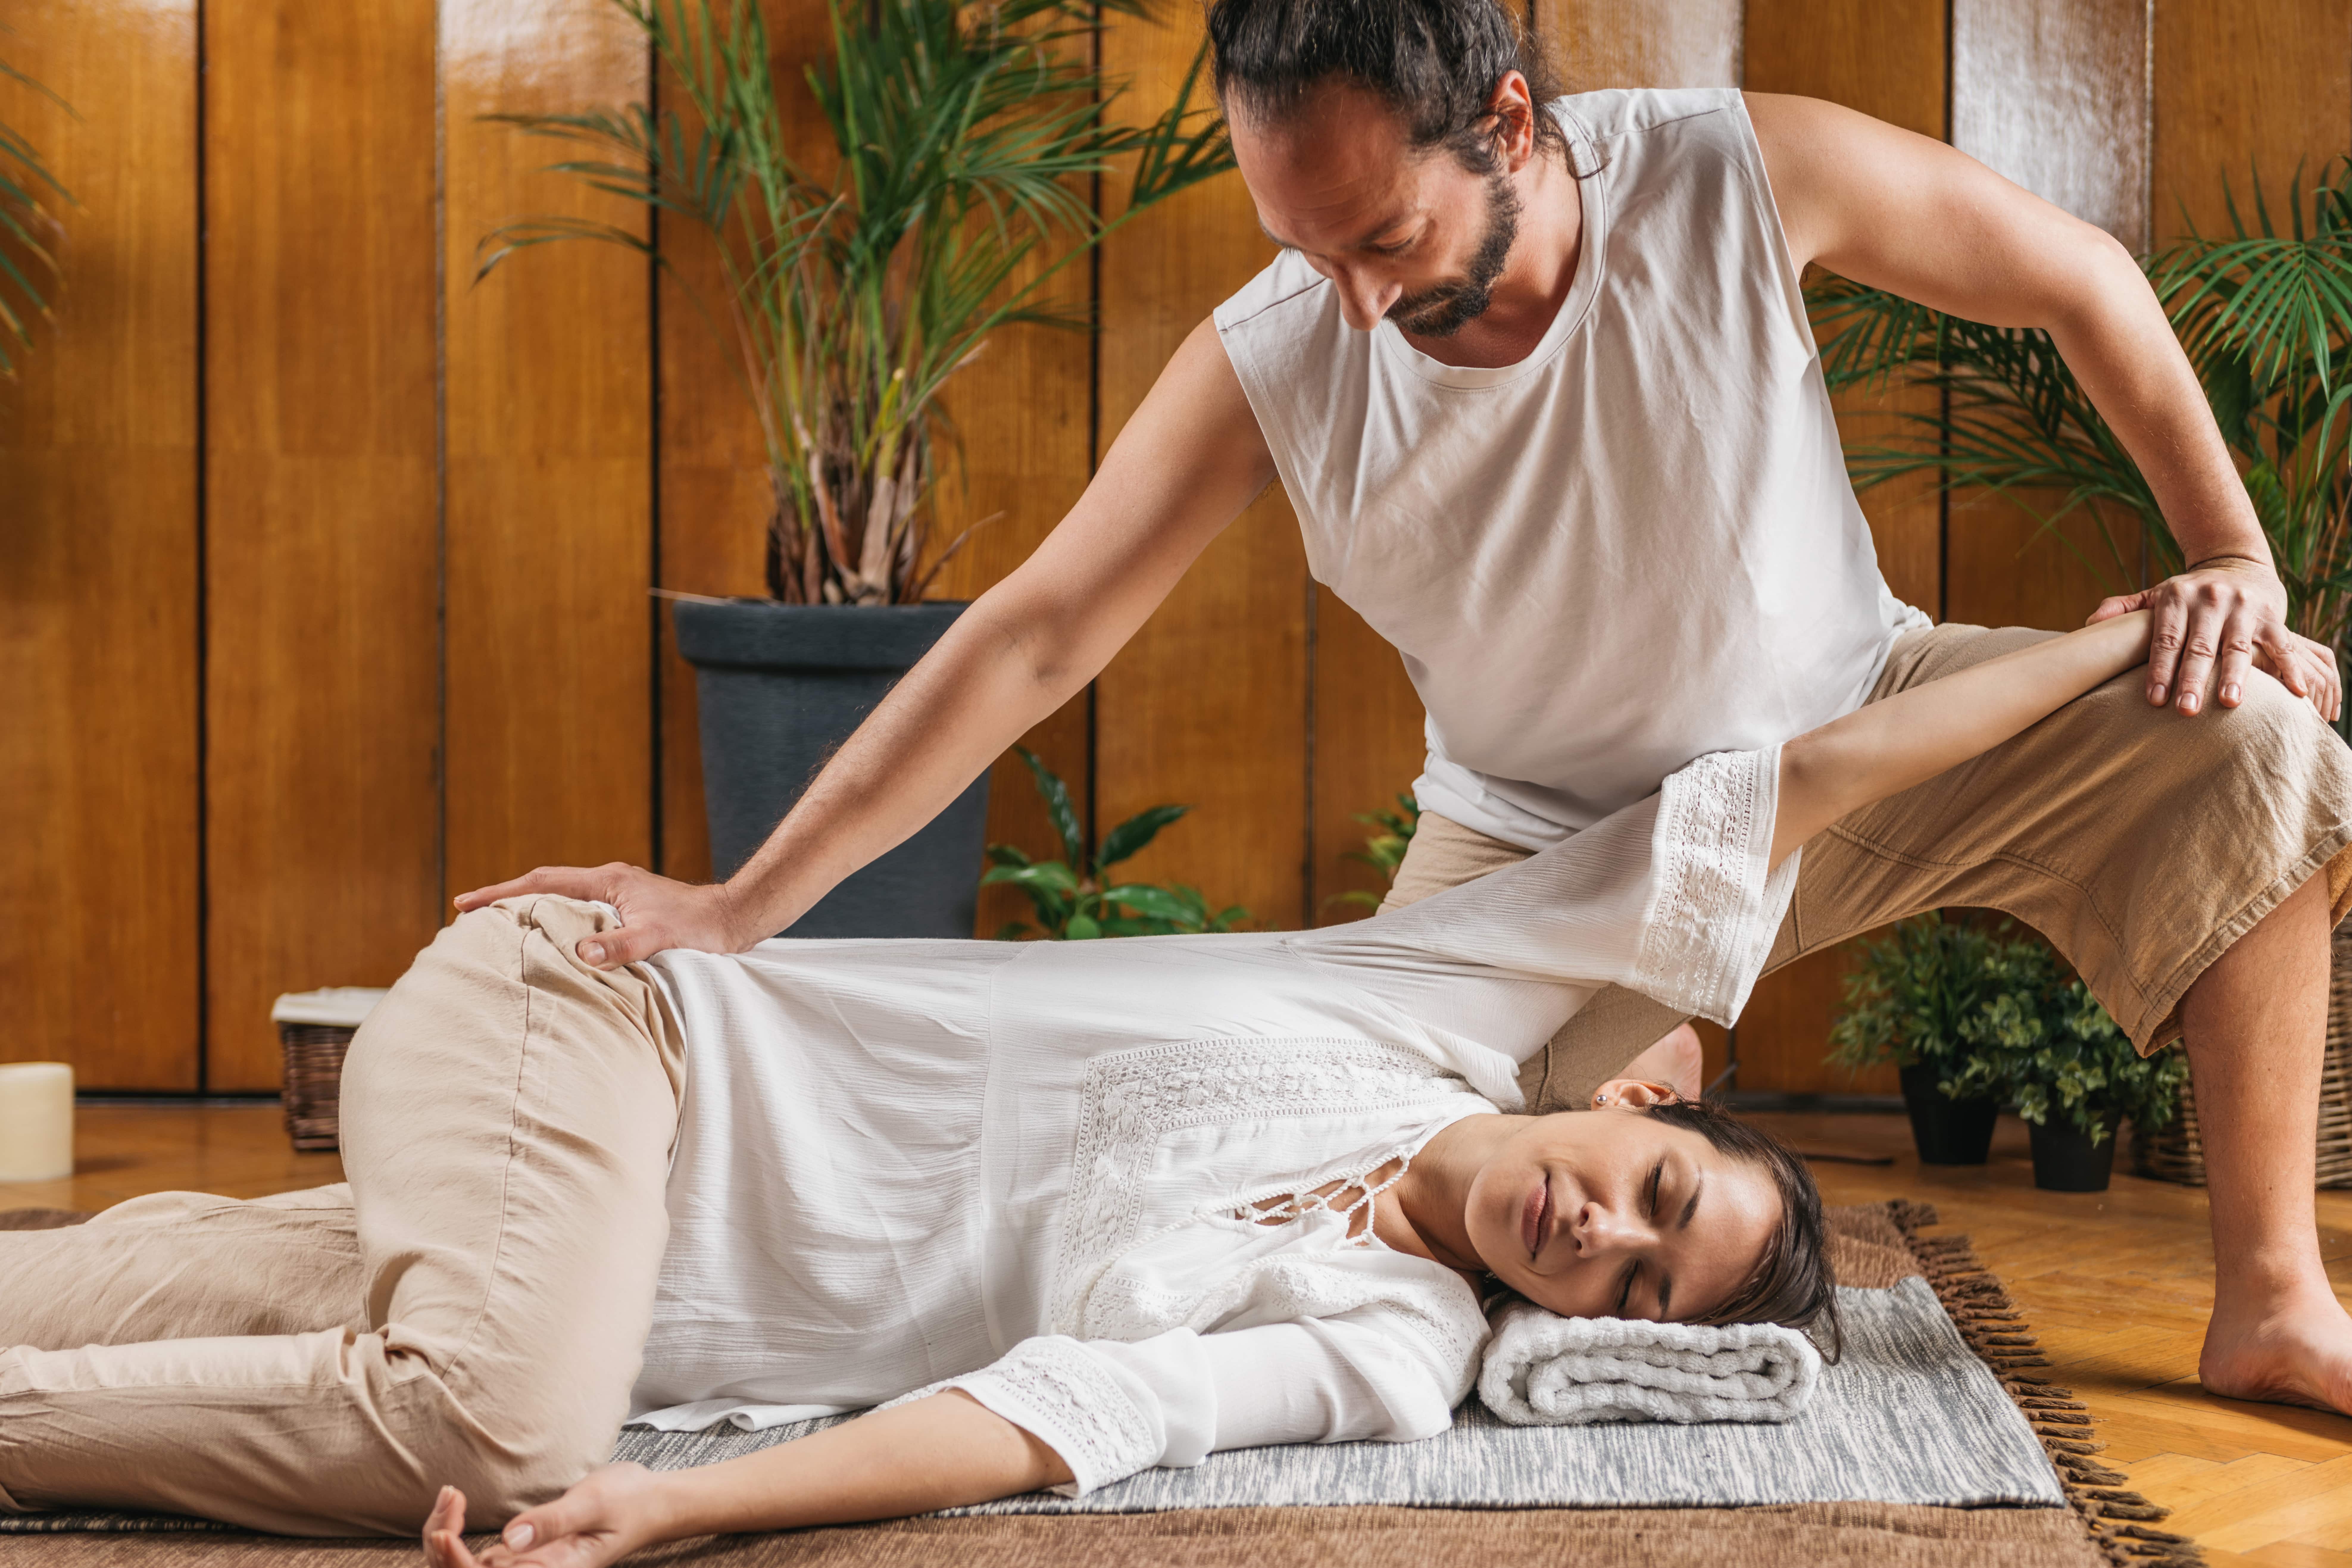 Man performing stretch with massage on young lady. The massage therapist is wearing white